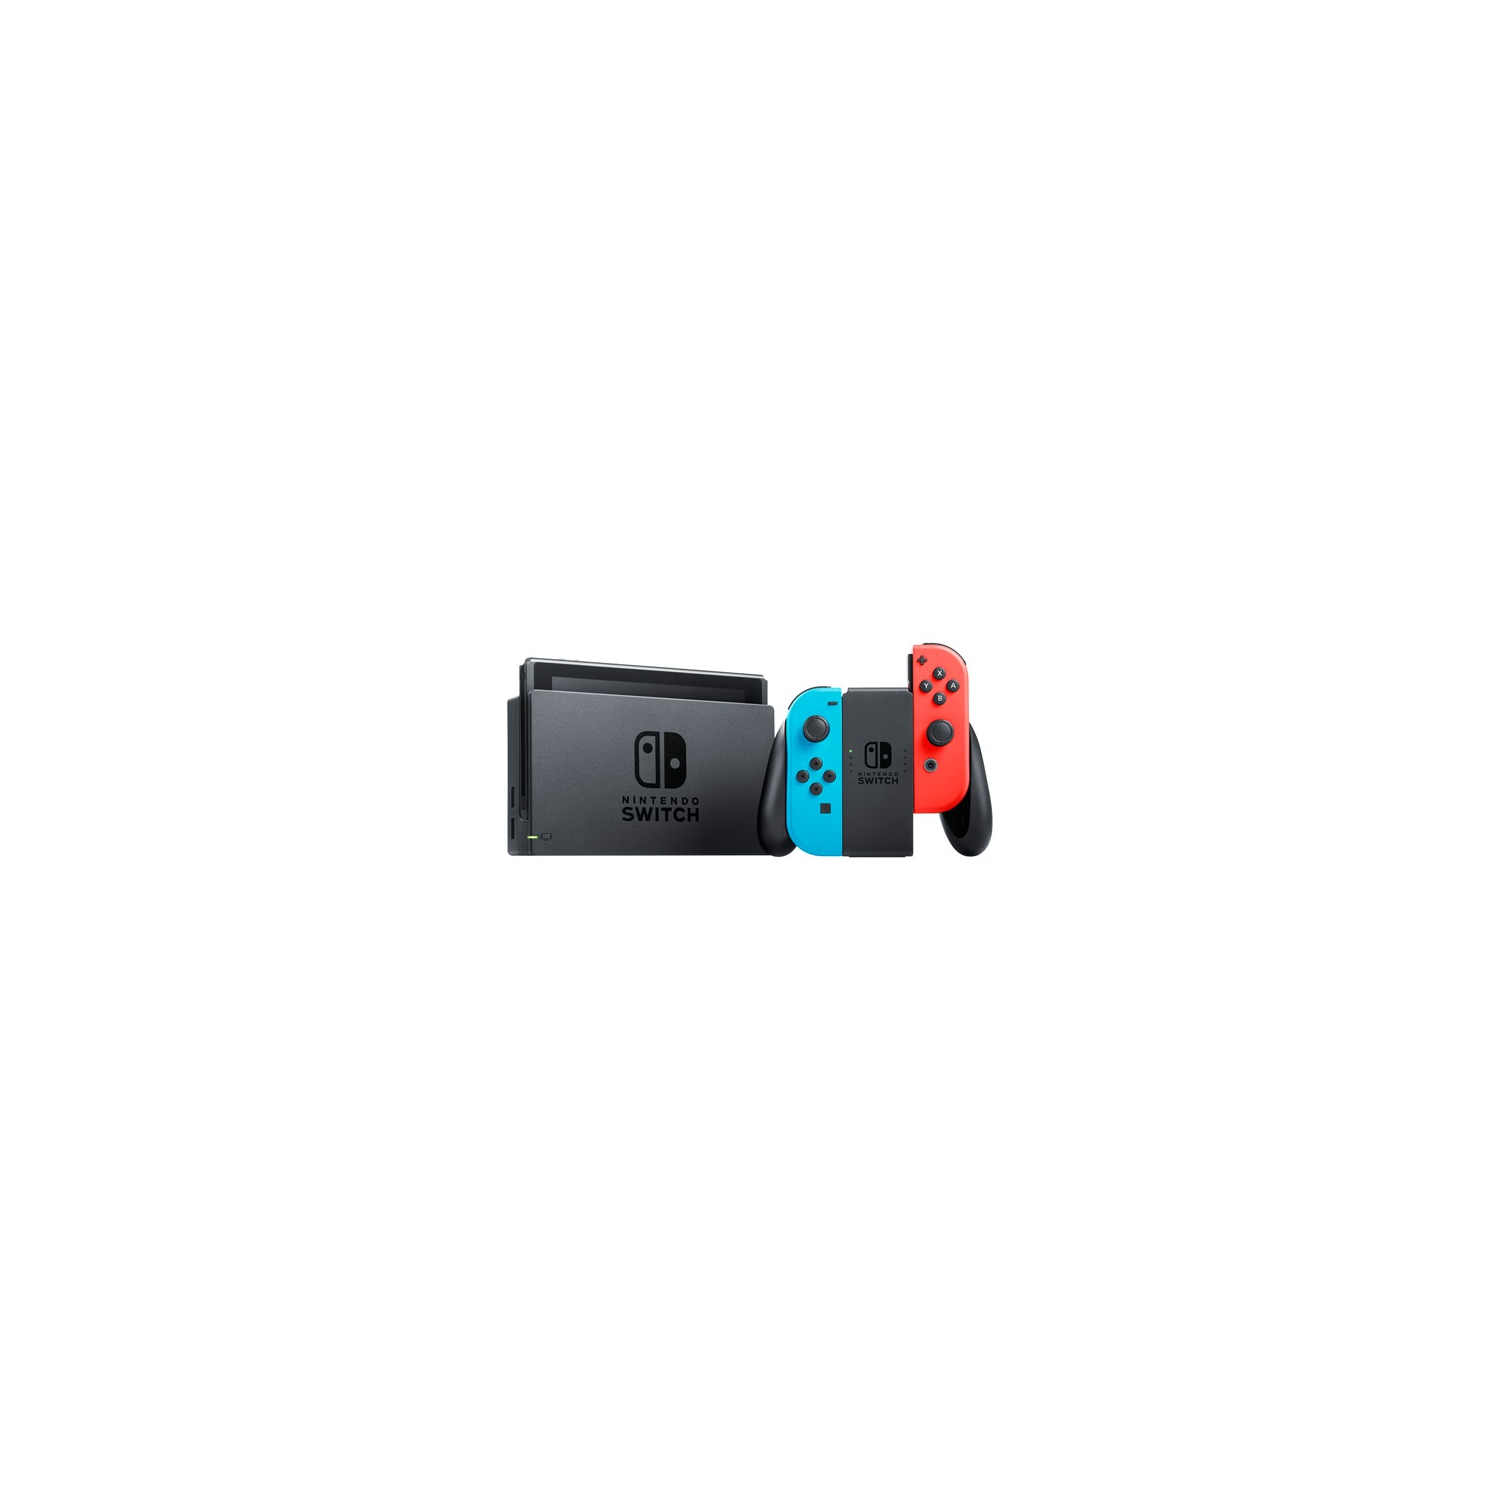 Refurbished (Good) - Nintendo Switch Console with Neon Red/Blue Joy-Con